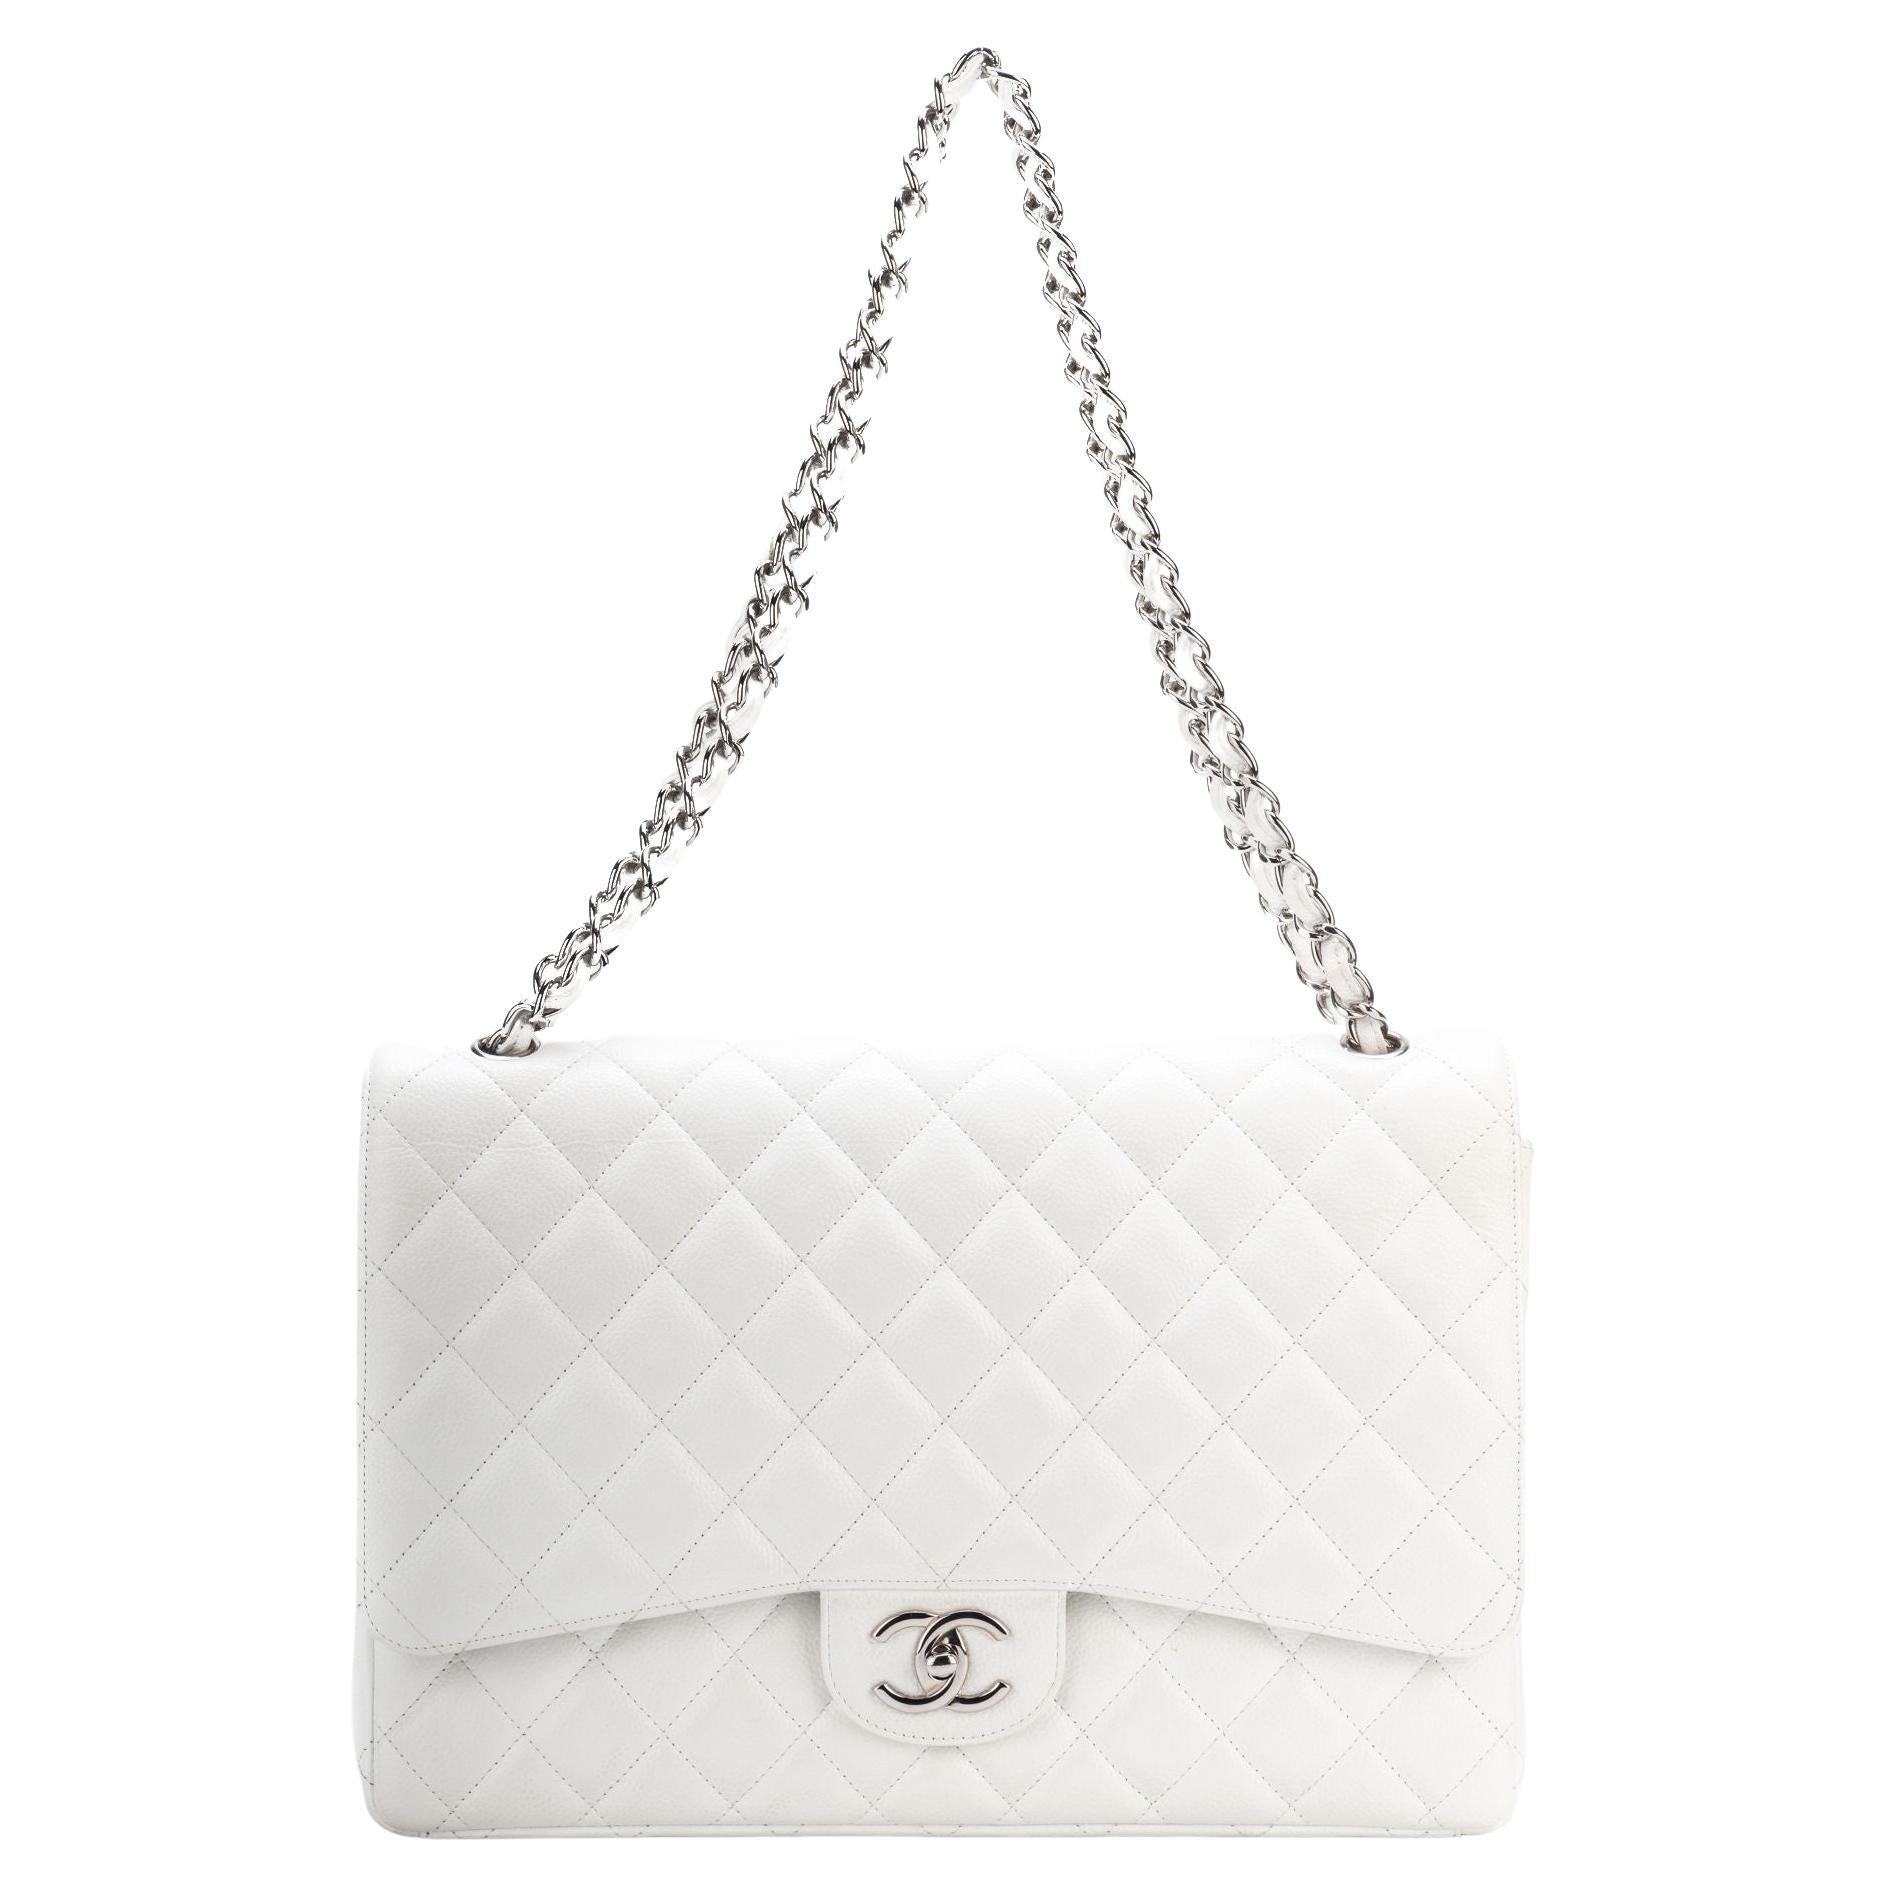 Chanel White Caviar Maxi Double Flap Bag               For Sale